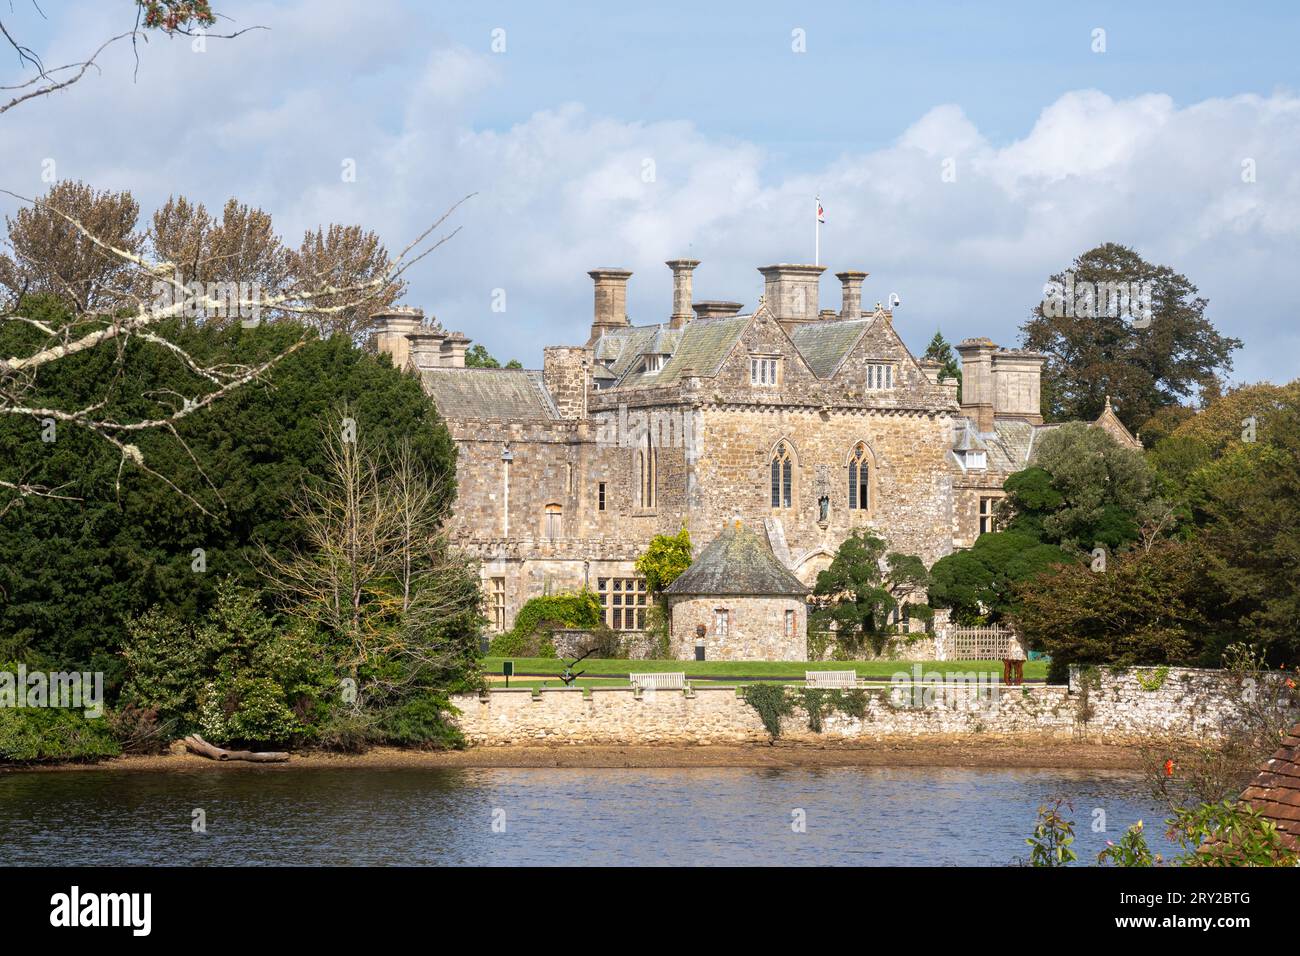 View of Beaulieu Palace House across Beaulieu River from the village, New Forest, Hampshire, England, UK Stock Photo